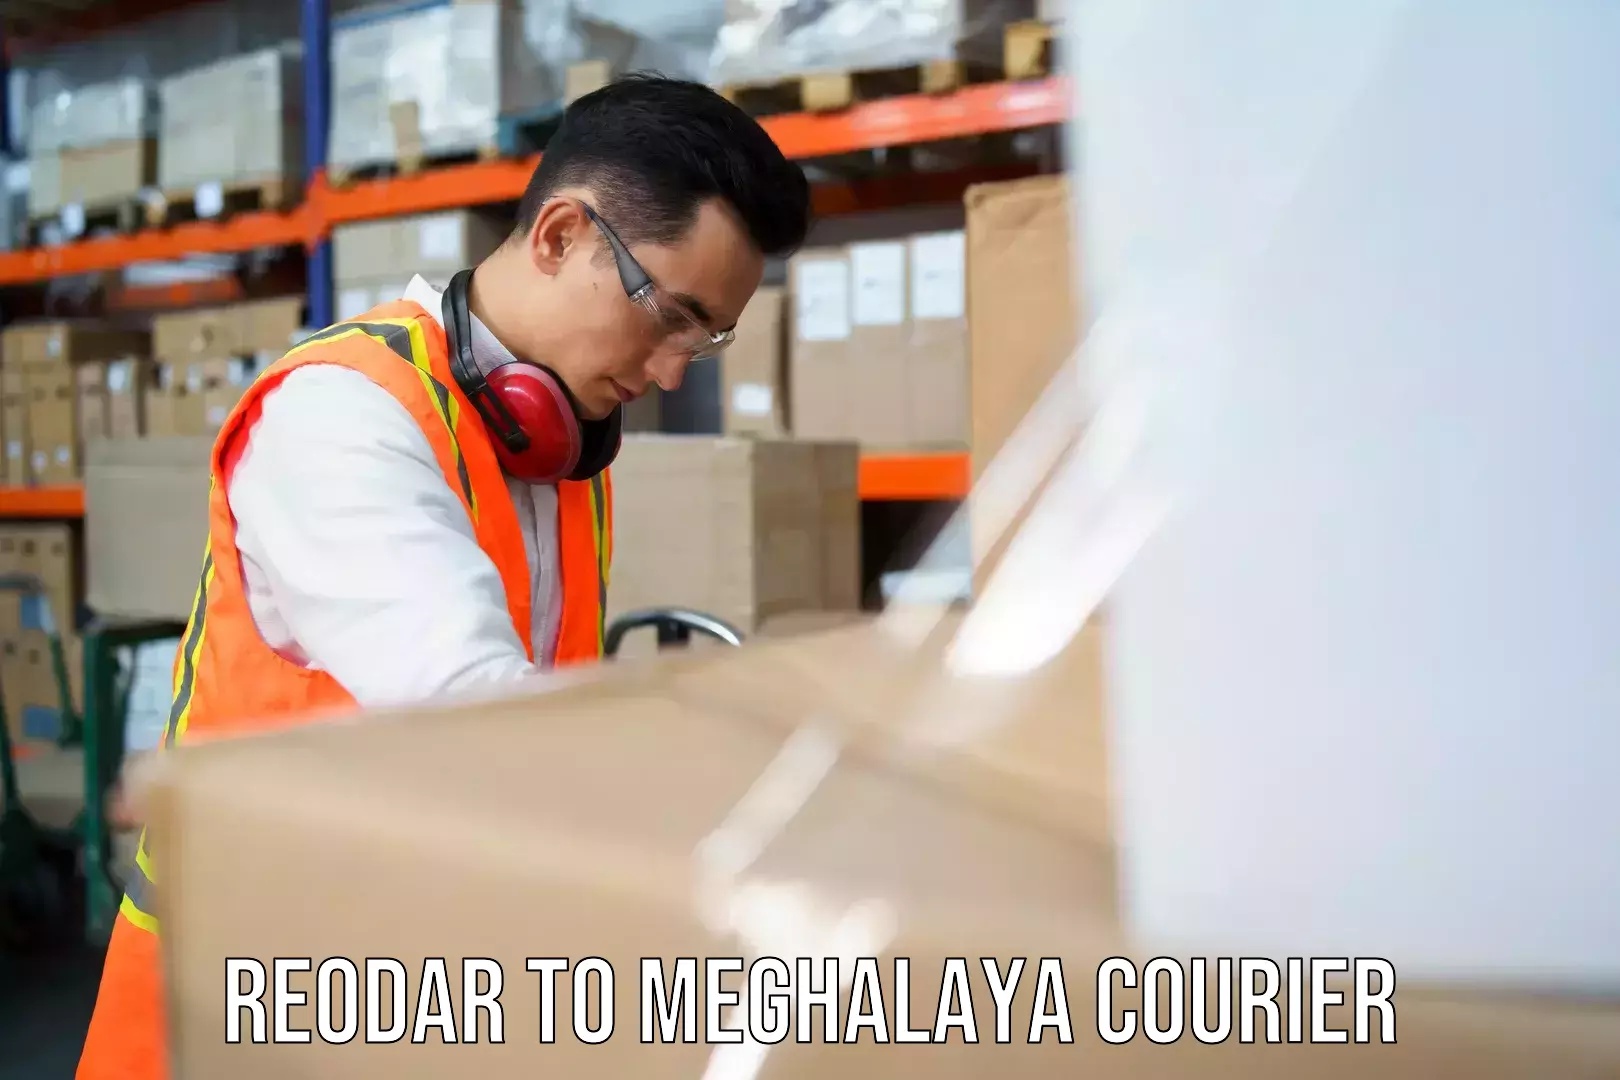 Courier service innovation in Reodar to Meghalaya